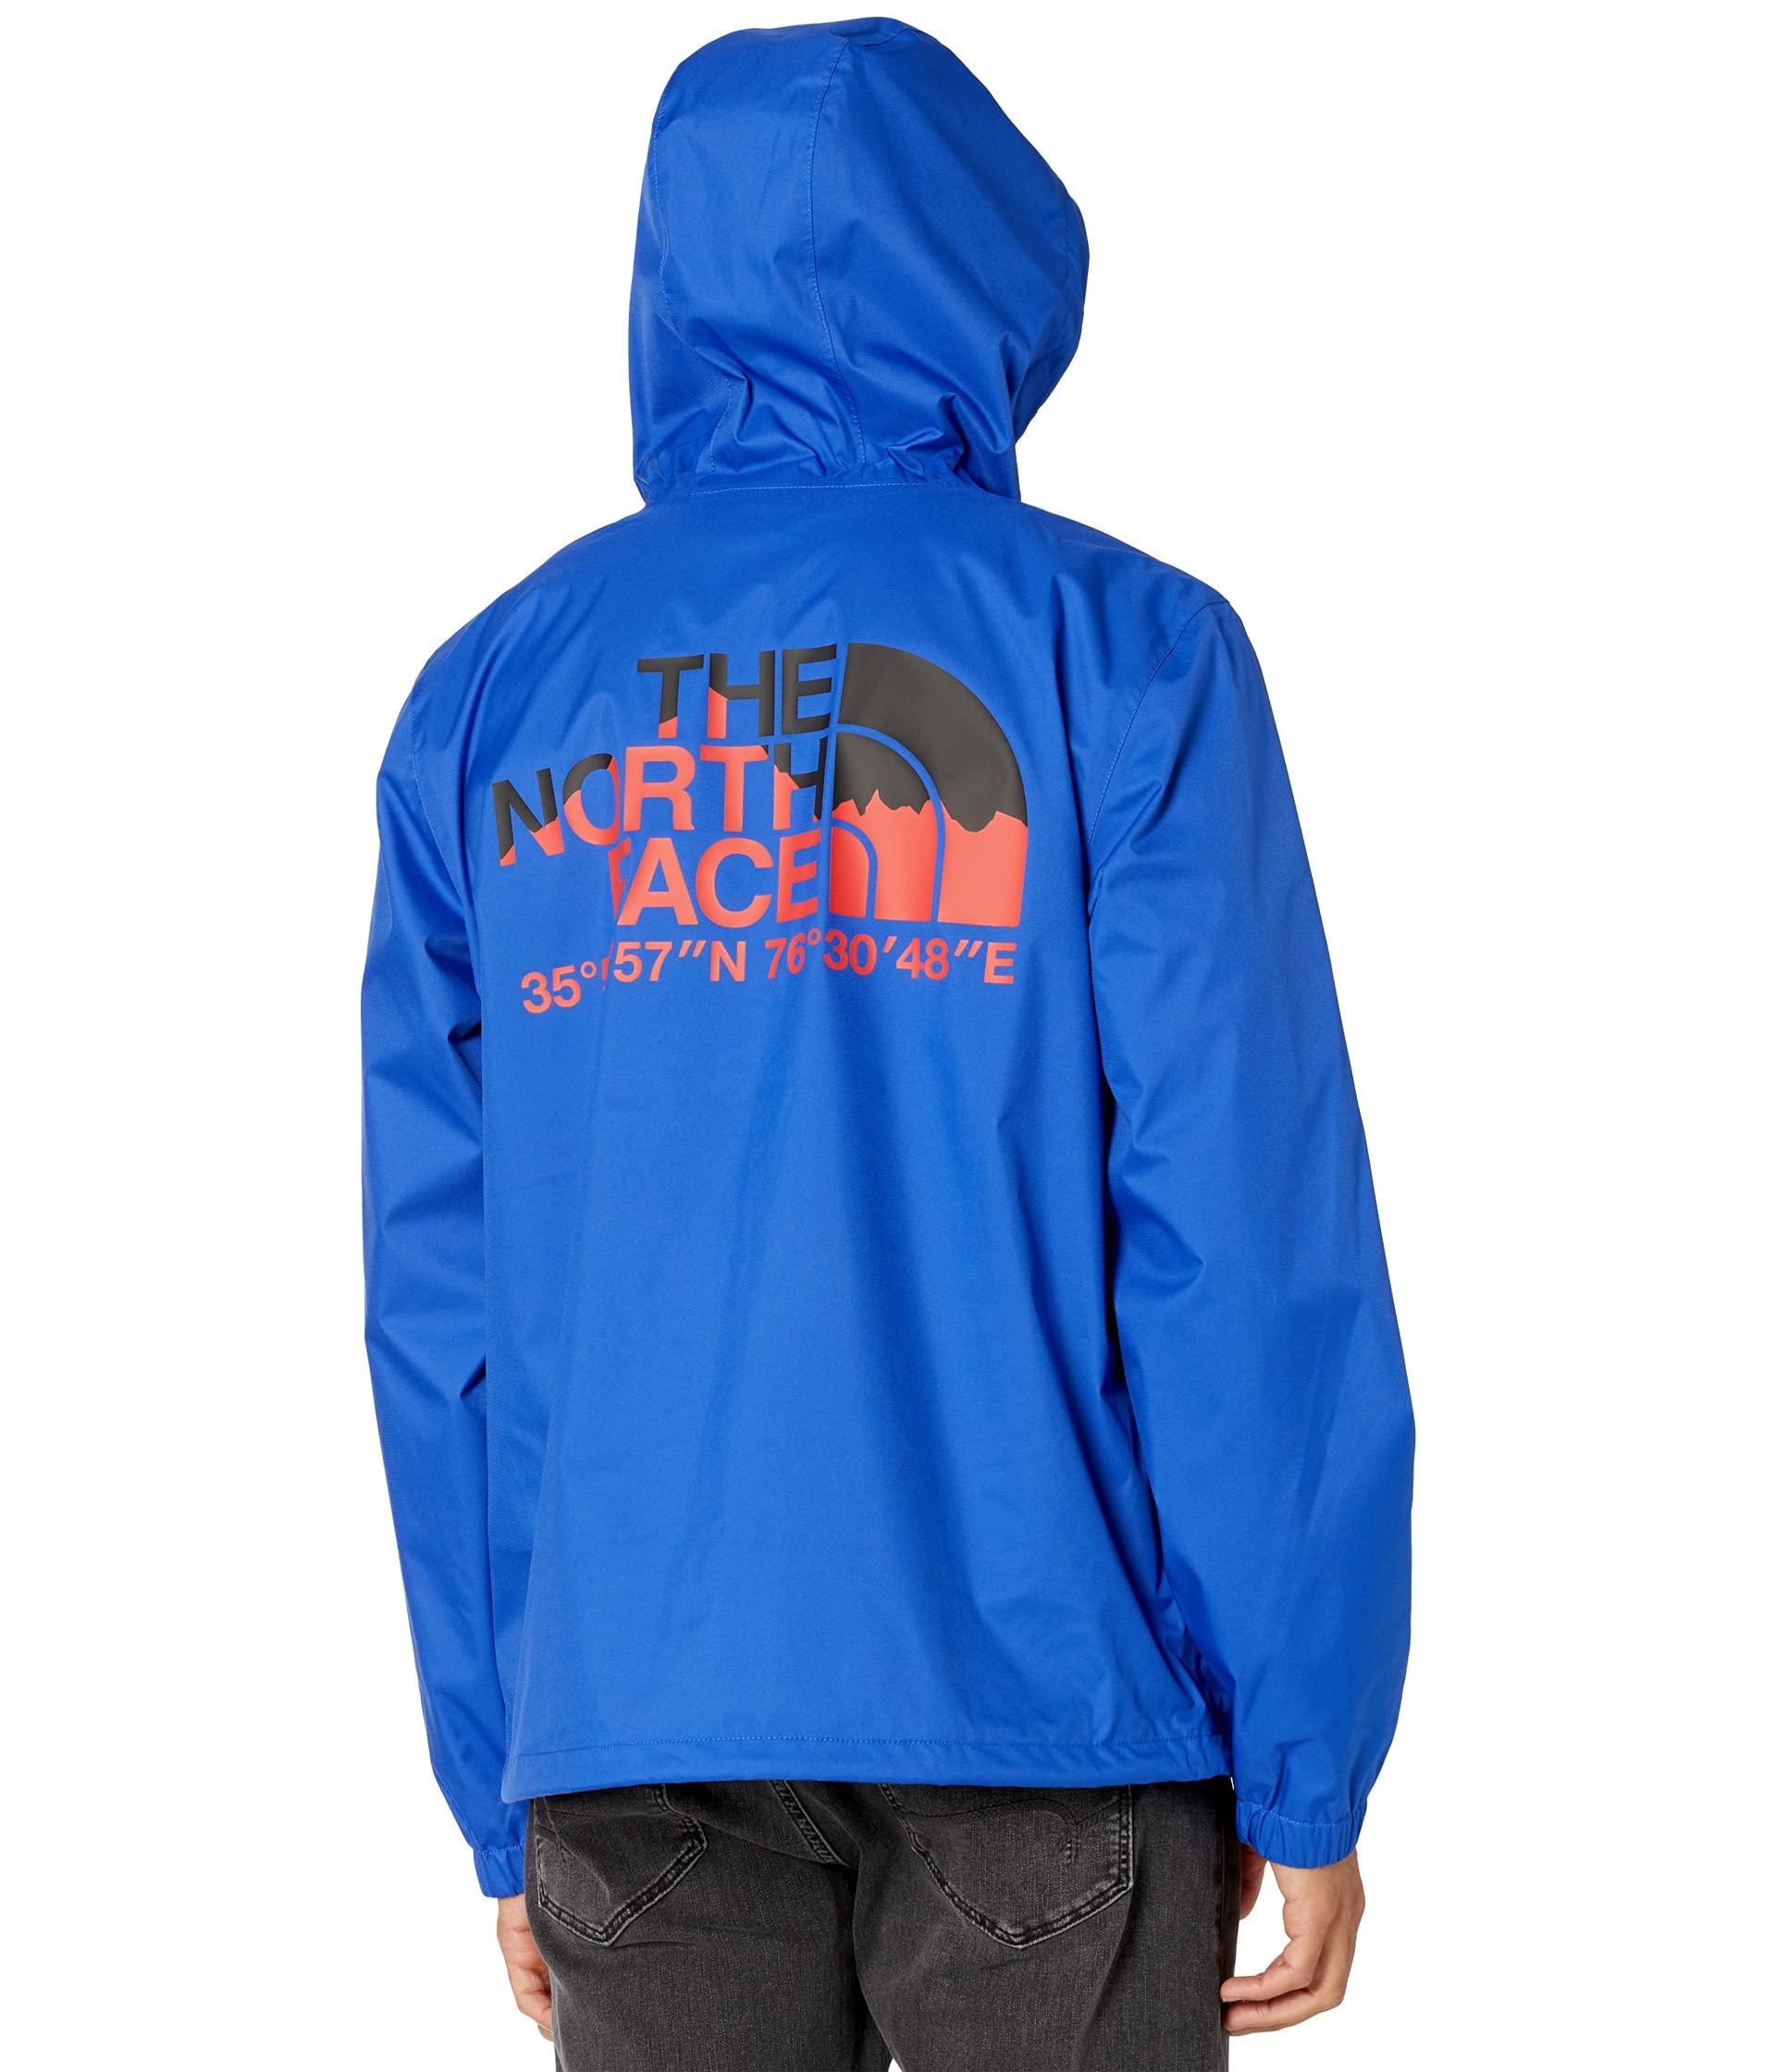 The North Face Synthetic Novelty Rain Shell in Blue for Men - Lyst